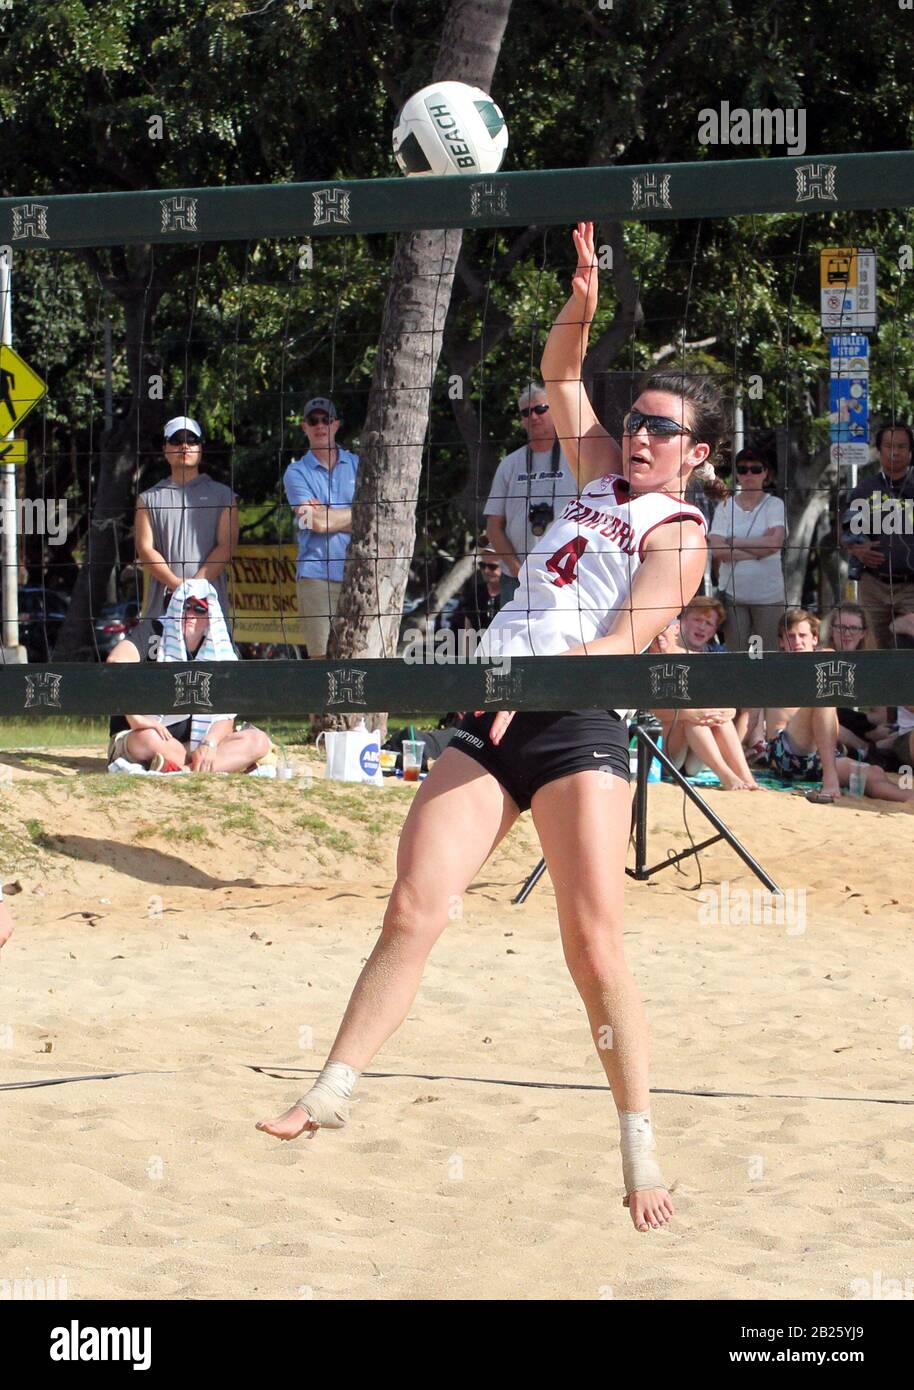 February 22, 2020 - Stanford Cardinal Shannon Richardson #4 during a match the Stanford Cardinal and the UCLA Bruins at Queen's Beach Waikiki in Honolulu, HI - Michael Sullivan/CSM Stock Photo